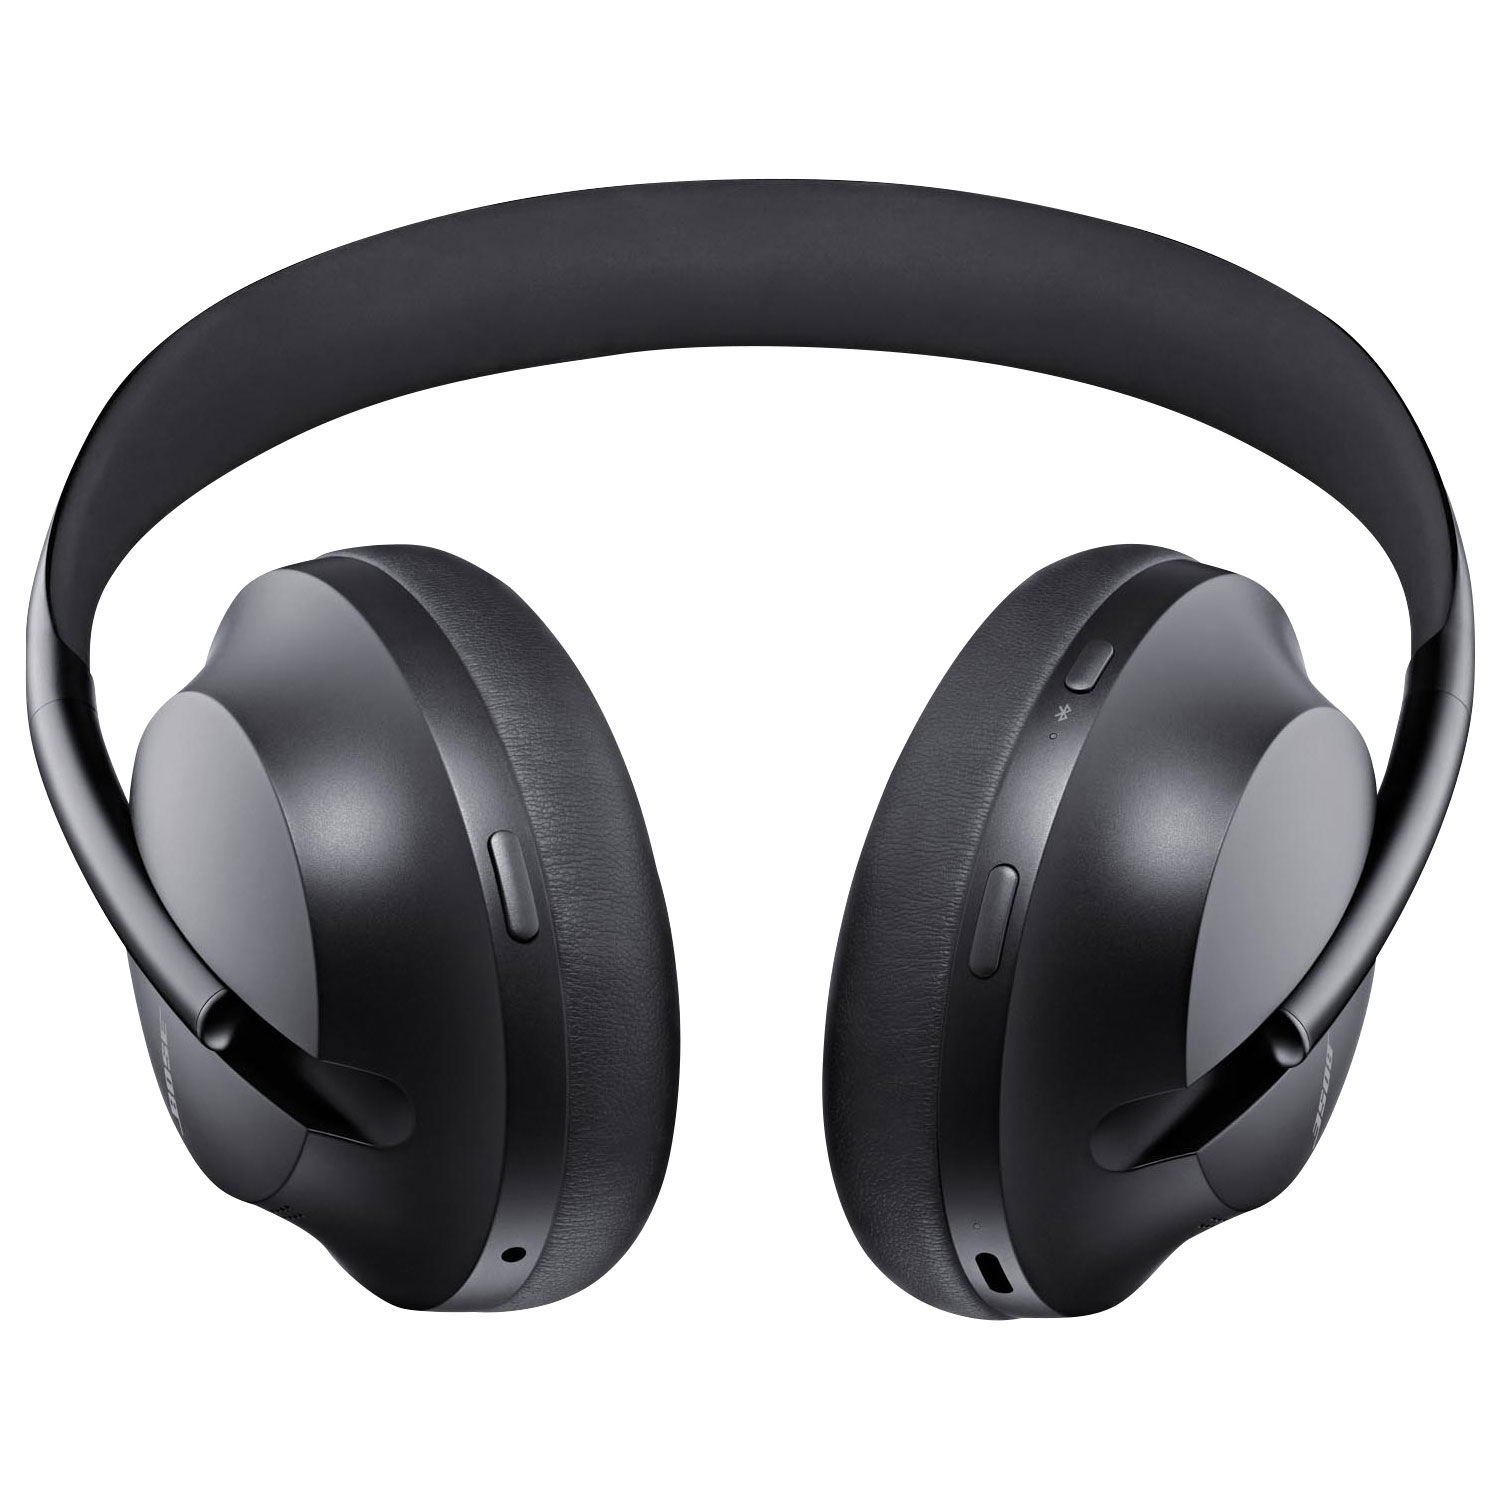 Refurbished (Excellent) -Bose Noise Cancelling Wireless Bluetooth Headphones 700, with Alexa Voice Control - Black